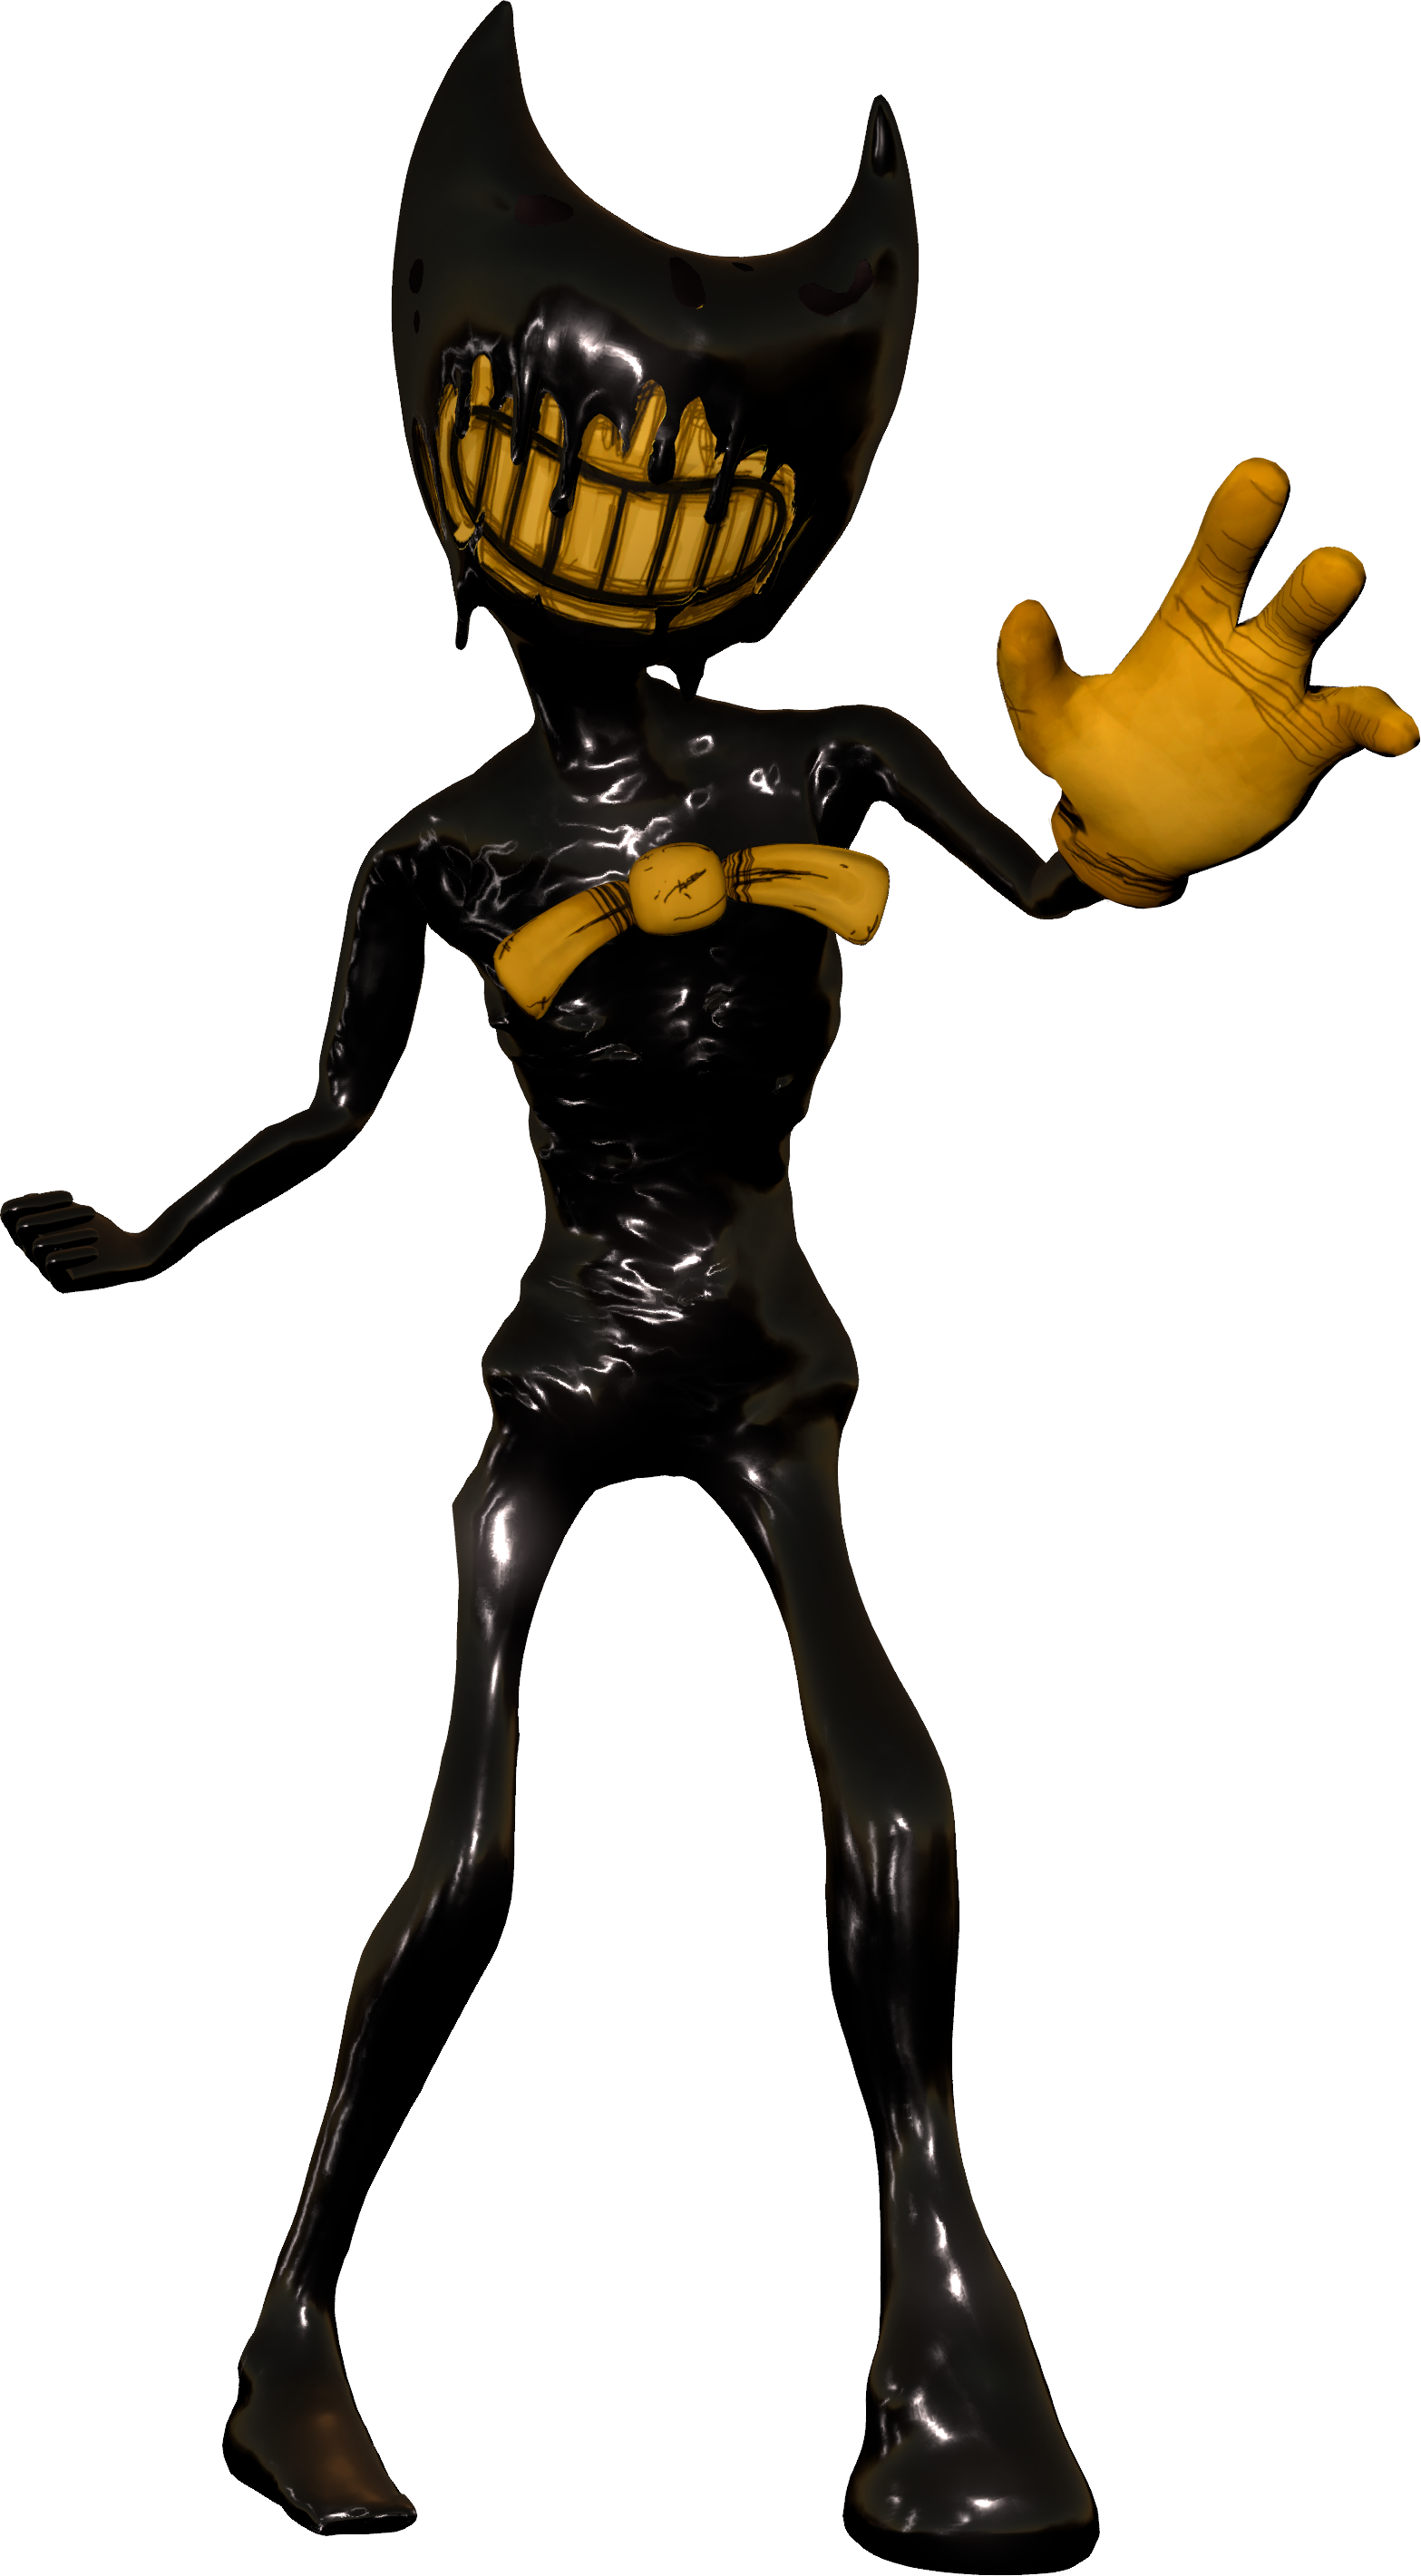 bendy-bendy-and-the-ink-machine-villains-wiki-fandom-powered-by-wikia